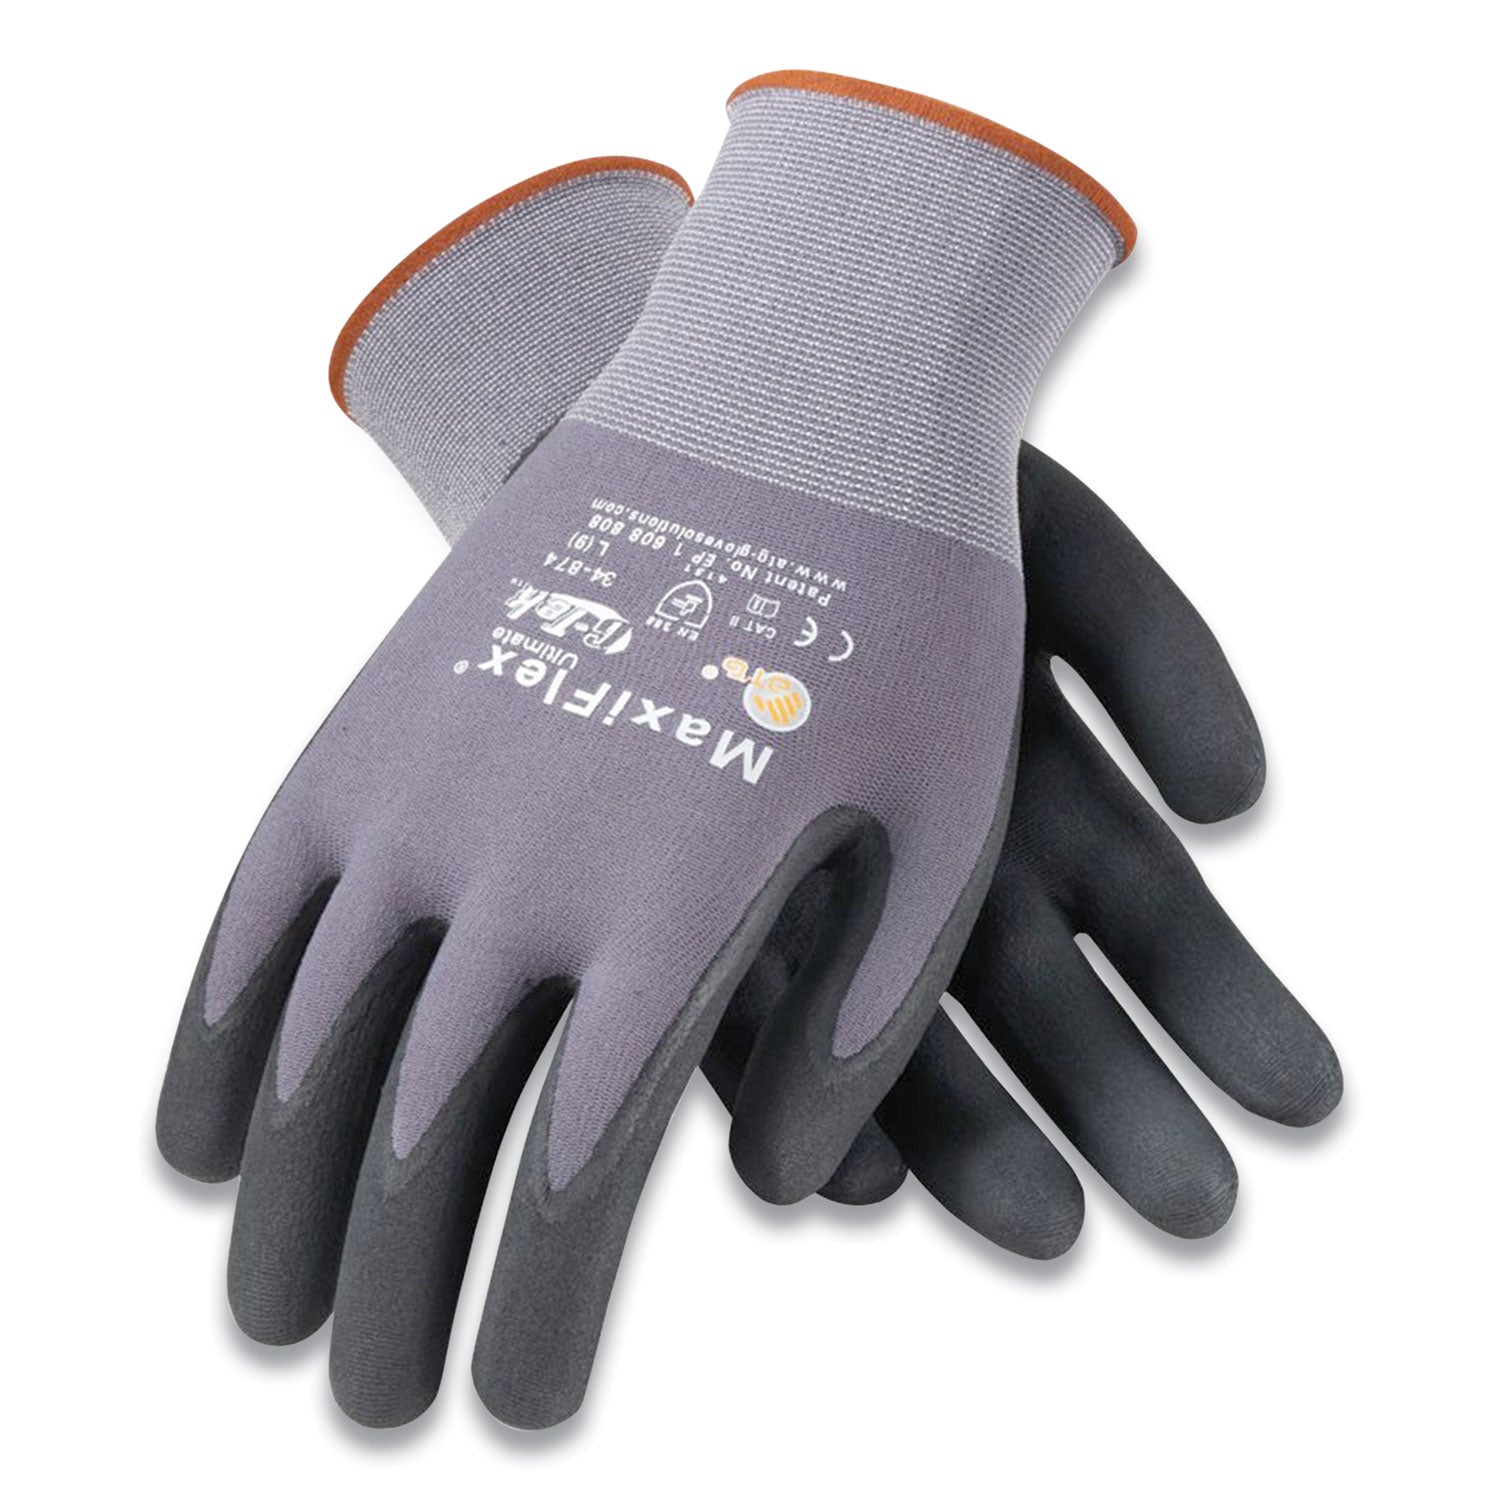 ultimate-seamless-knit-nylon-gloves-nitrile-coated-microfoam-grip-on-palm-and-fingers-x-large-gray-12-pairs_pid34874xl - 2